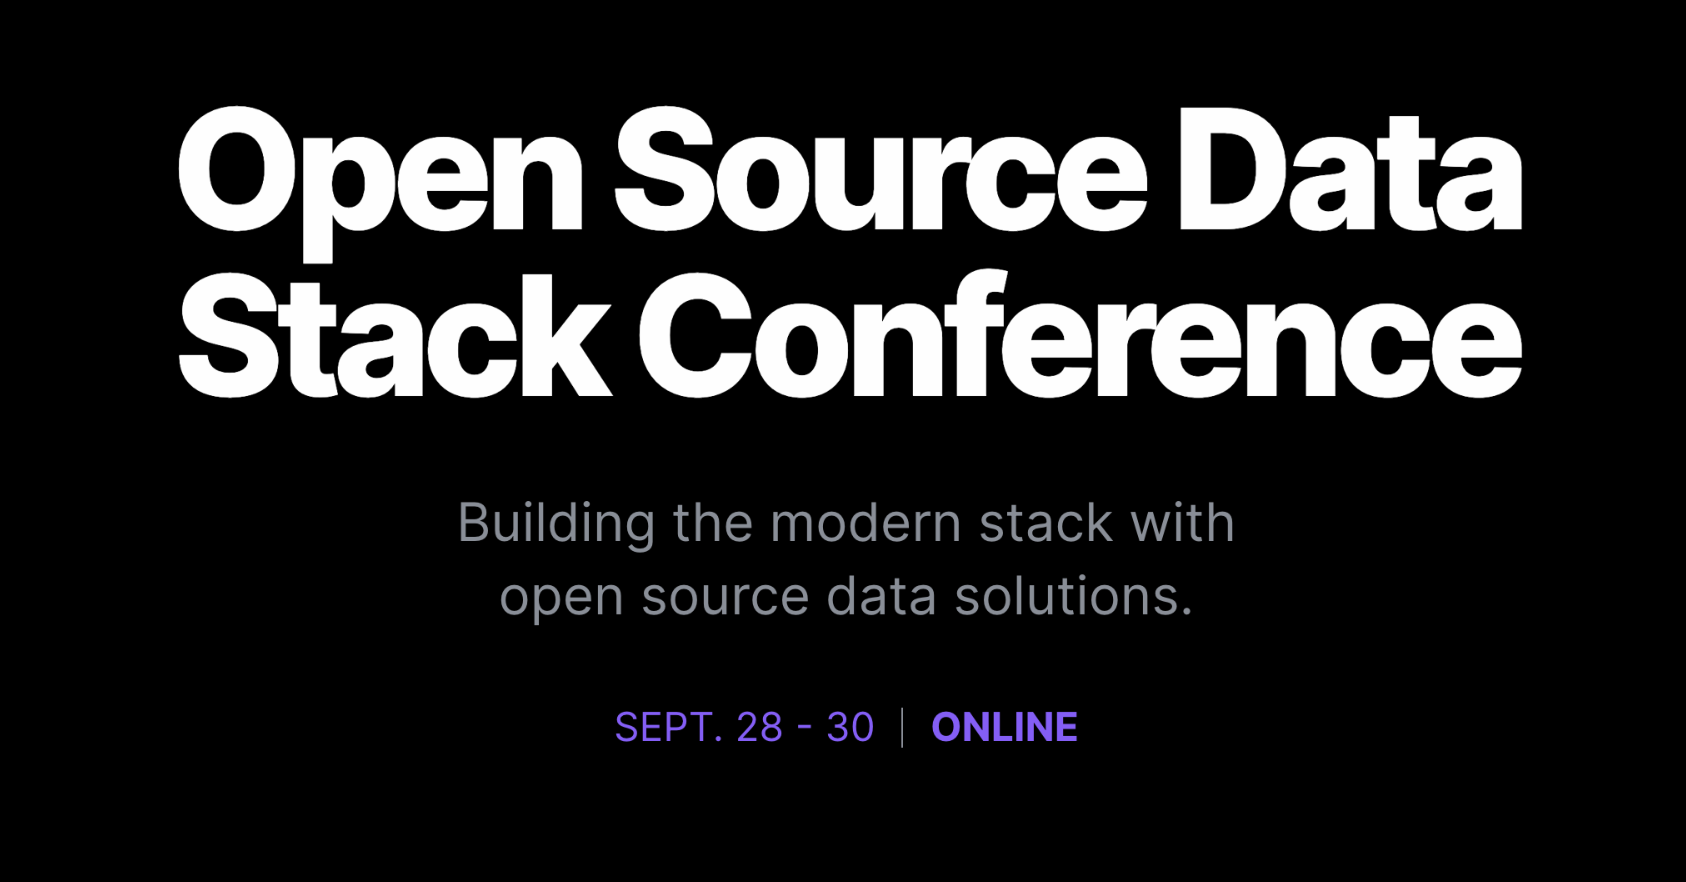 Schedule - Open Source Data Stack Conference